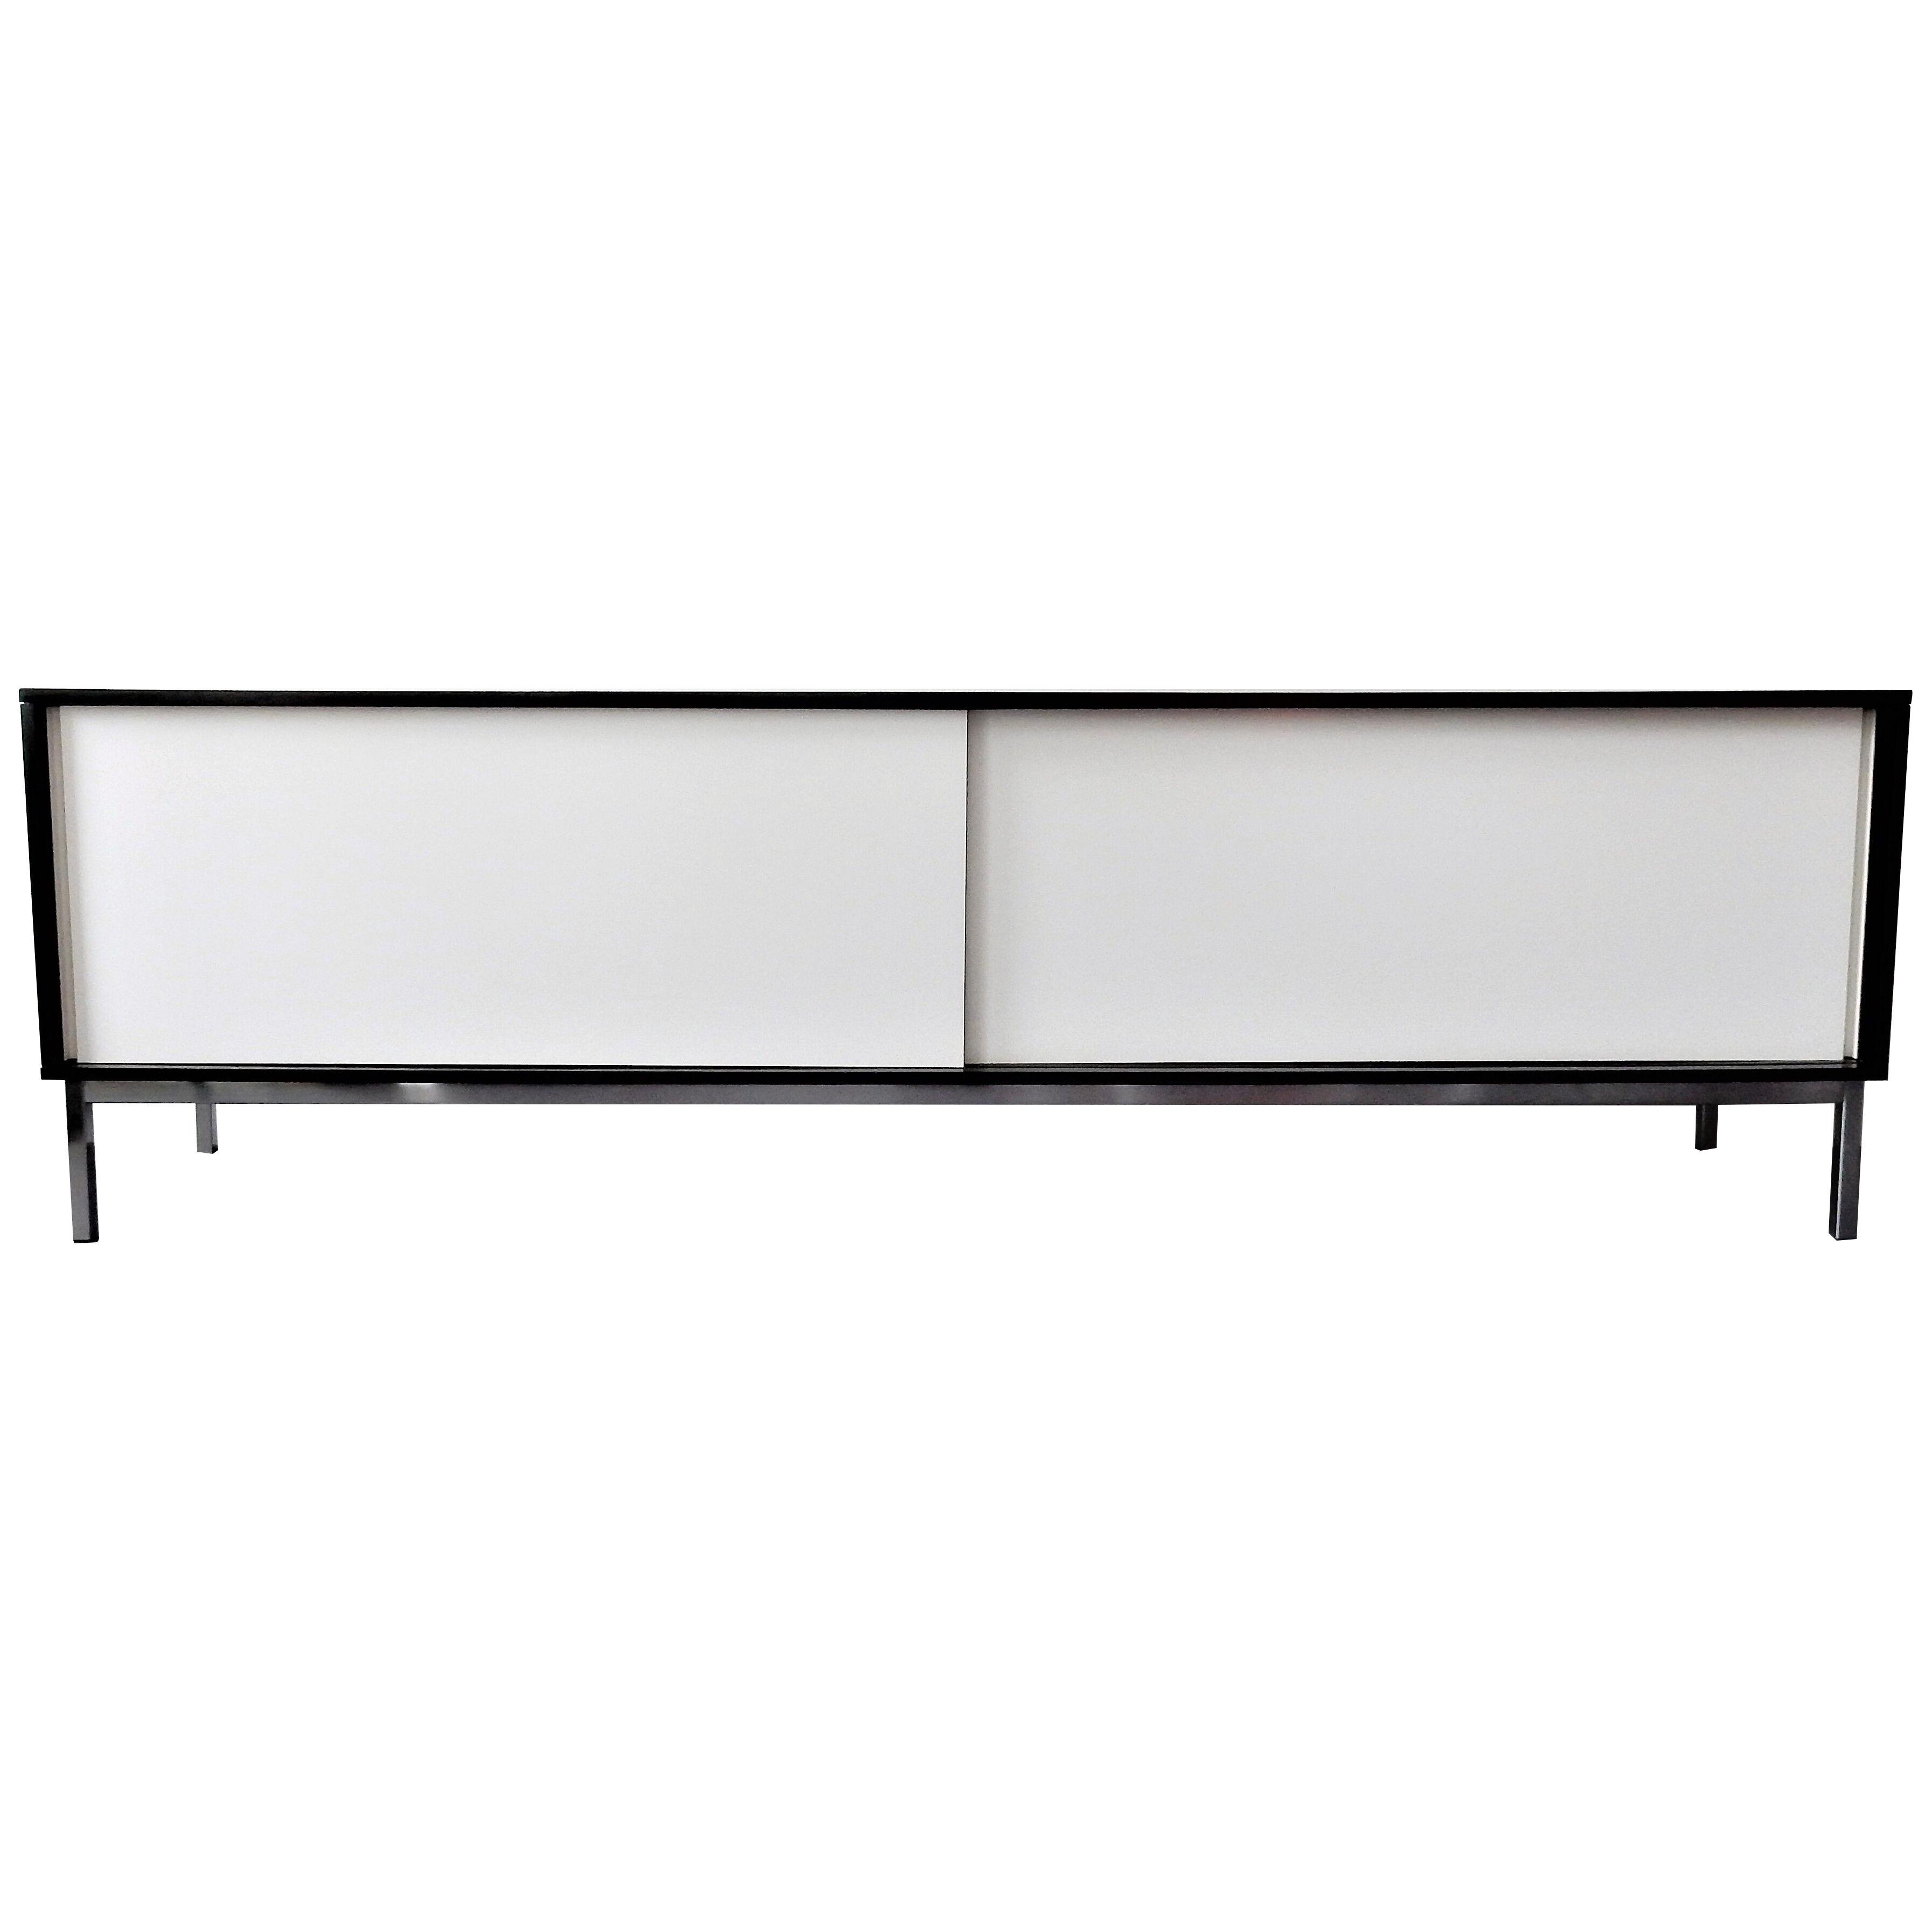 Large black and white KW85 sideboard by Martin Visser for 't Spectrum, 1960's